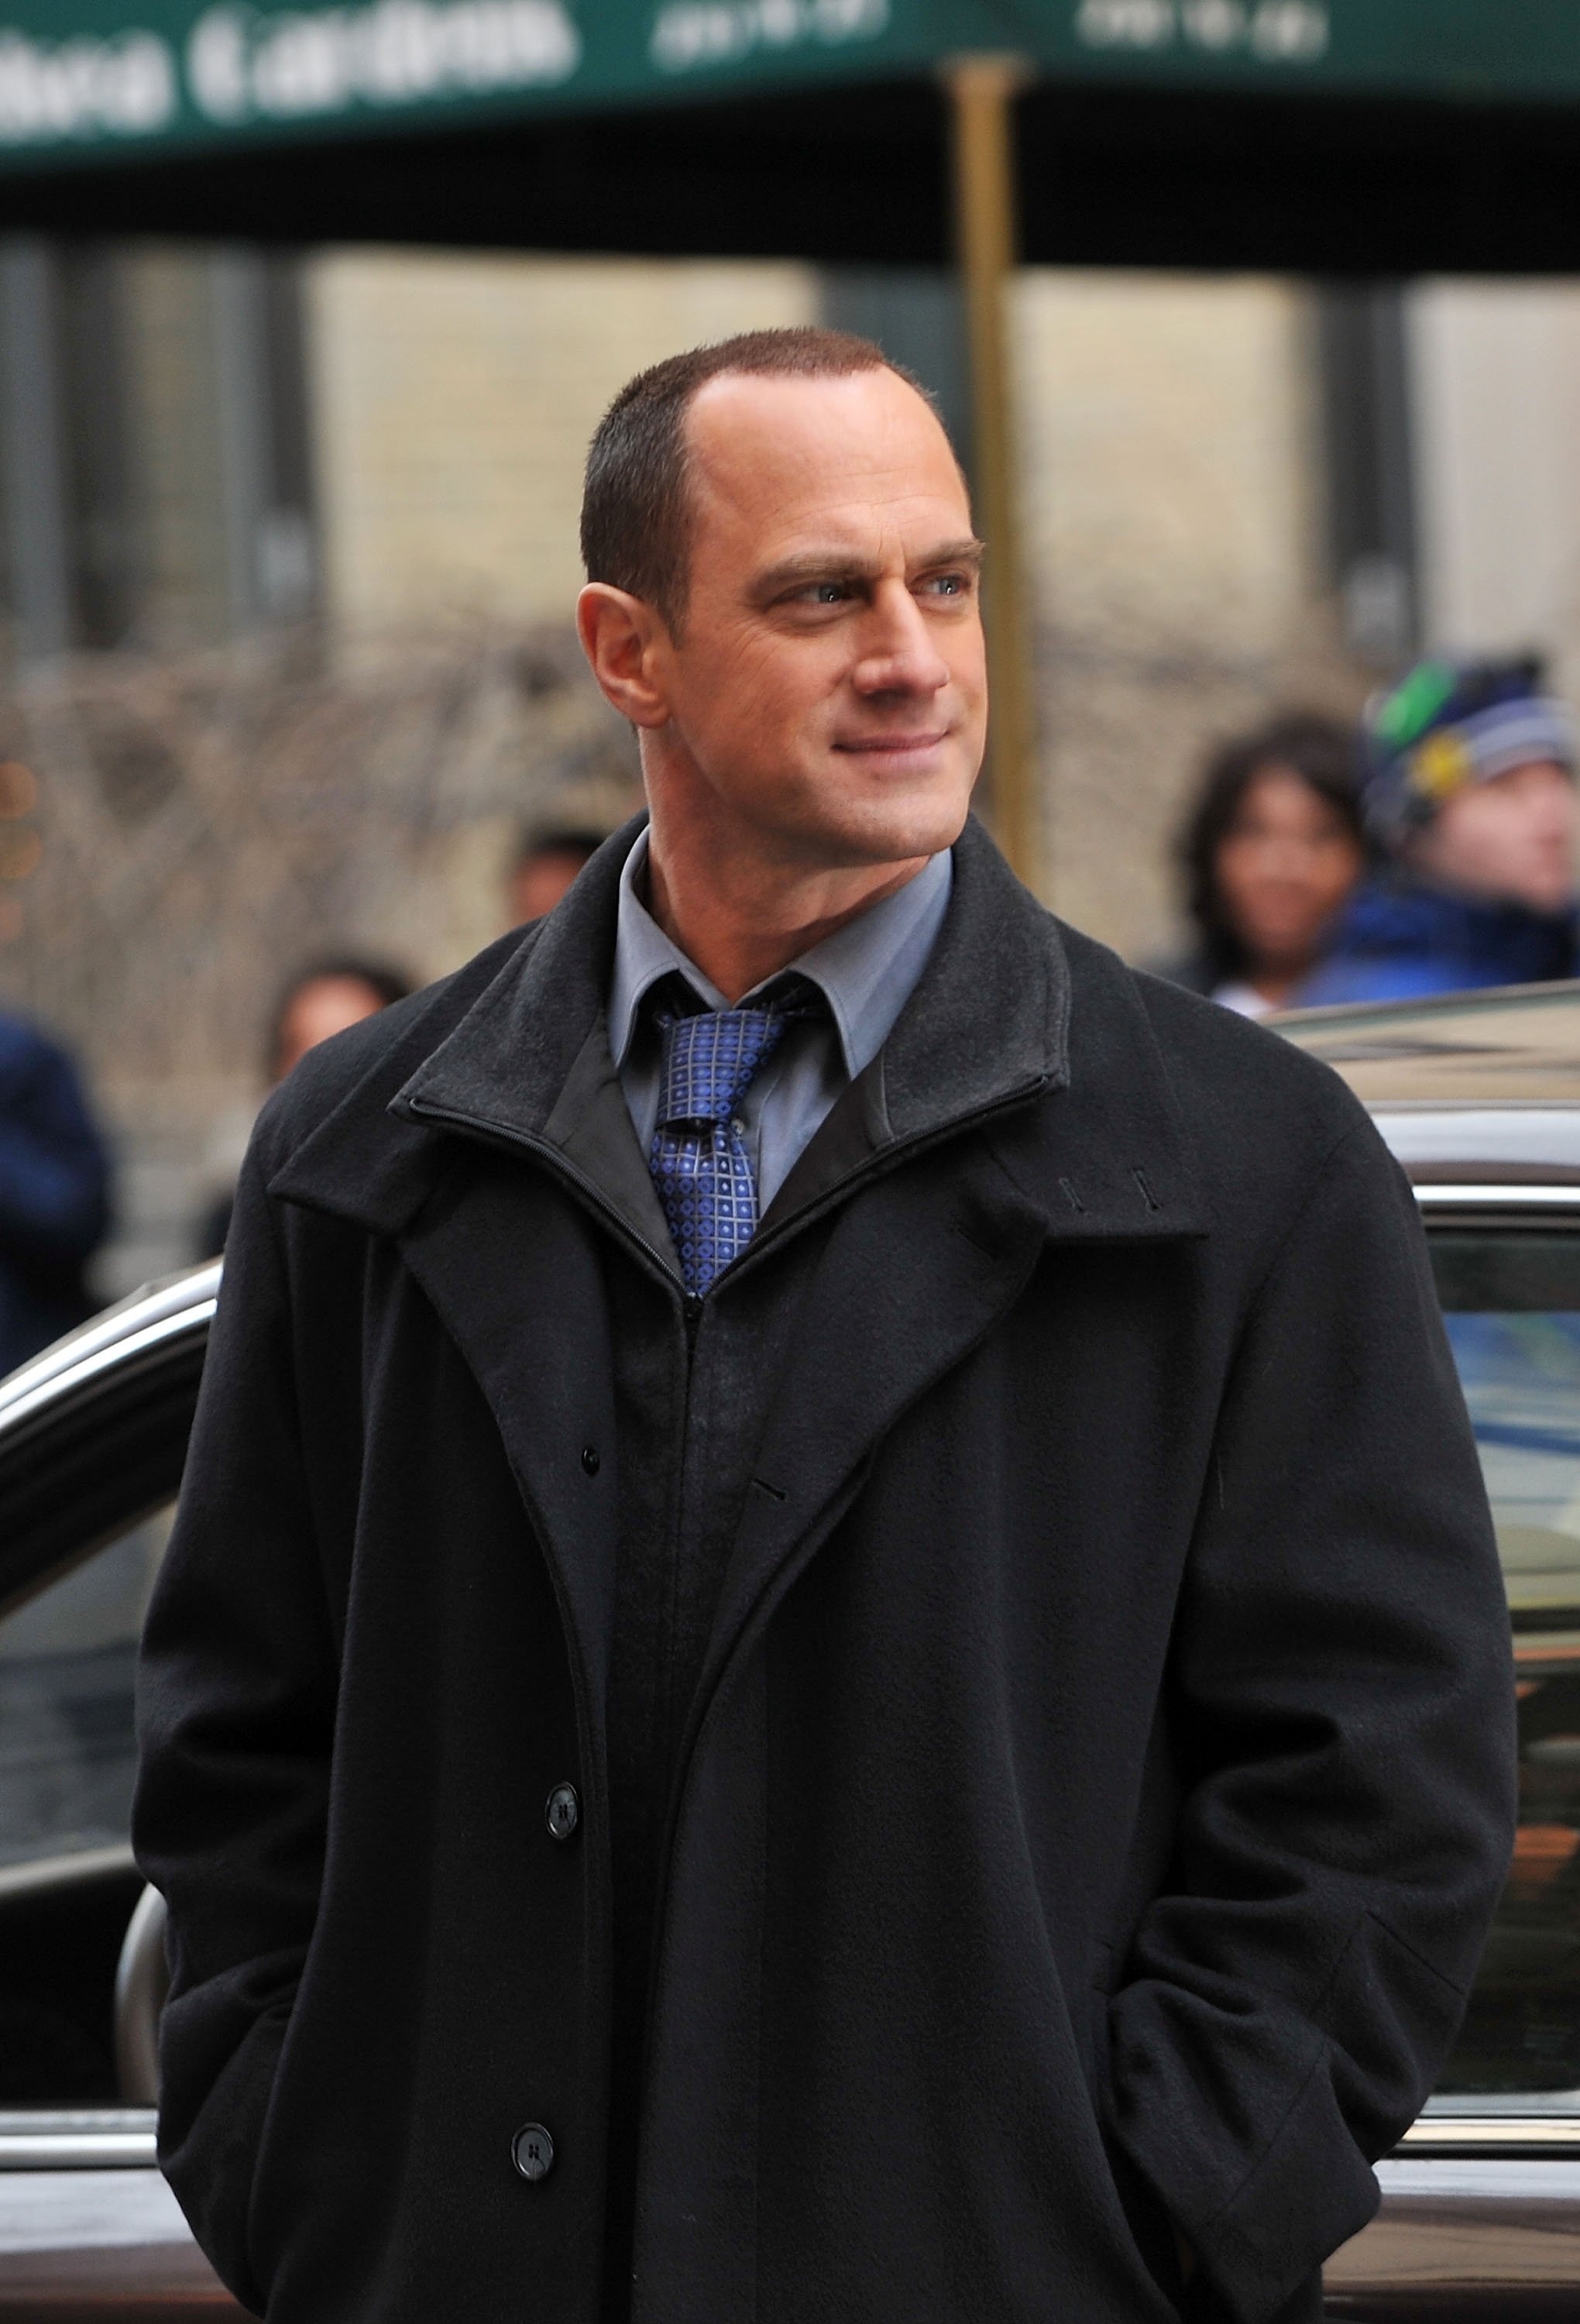  Christopher Meloni on location for "Law & Order: SVU" on the streets of Manhattan on January 26, 2010 in New York City | Photo: GettyImages